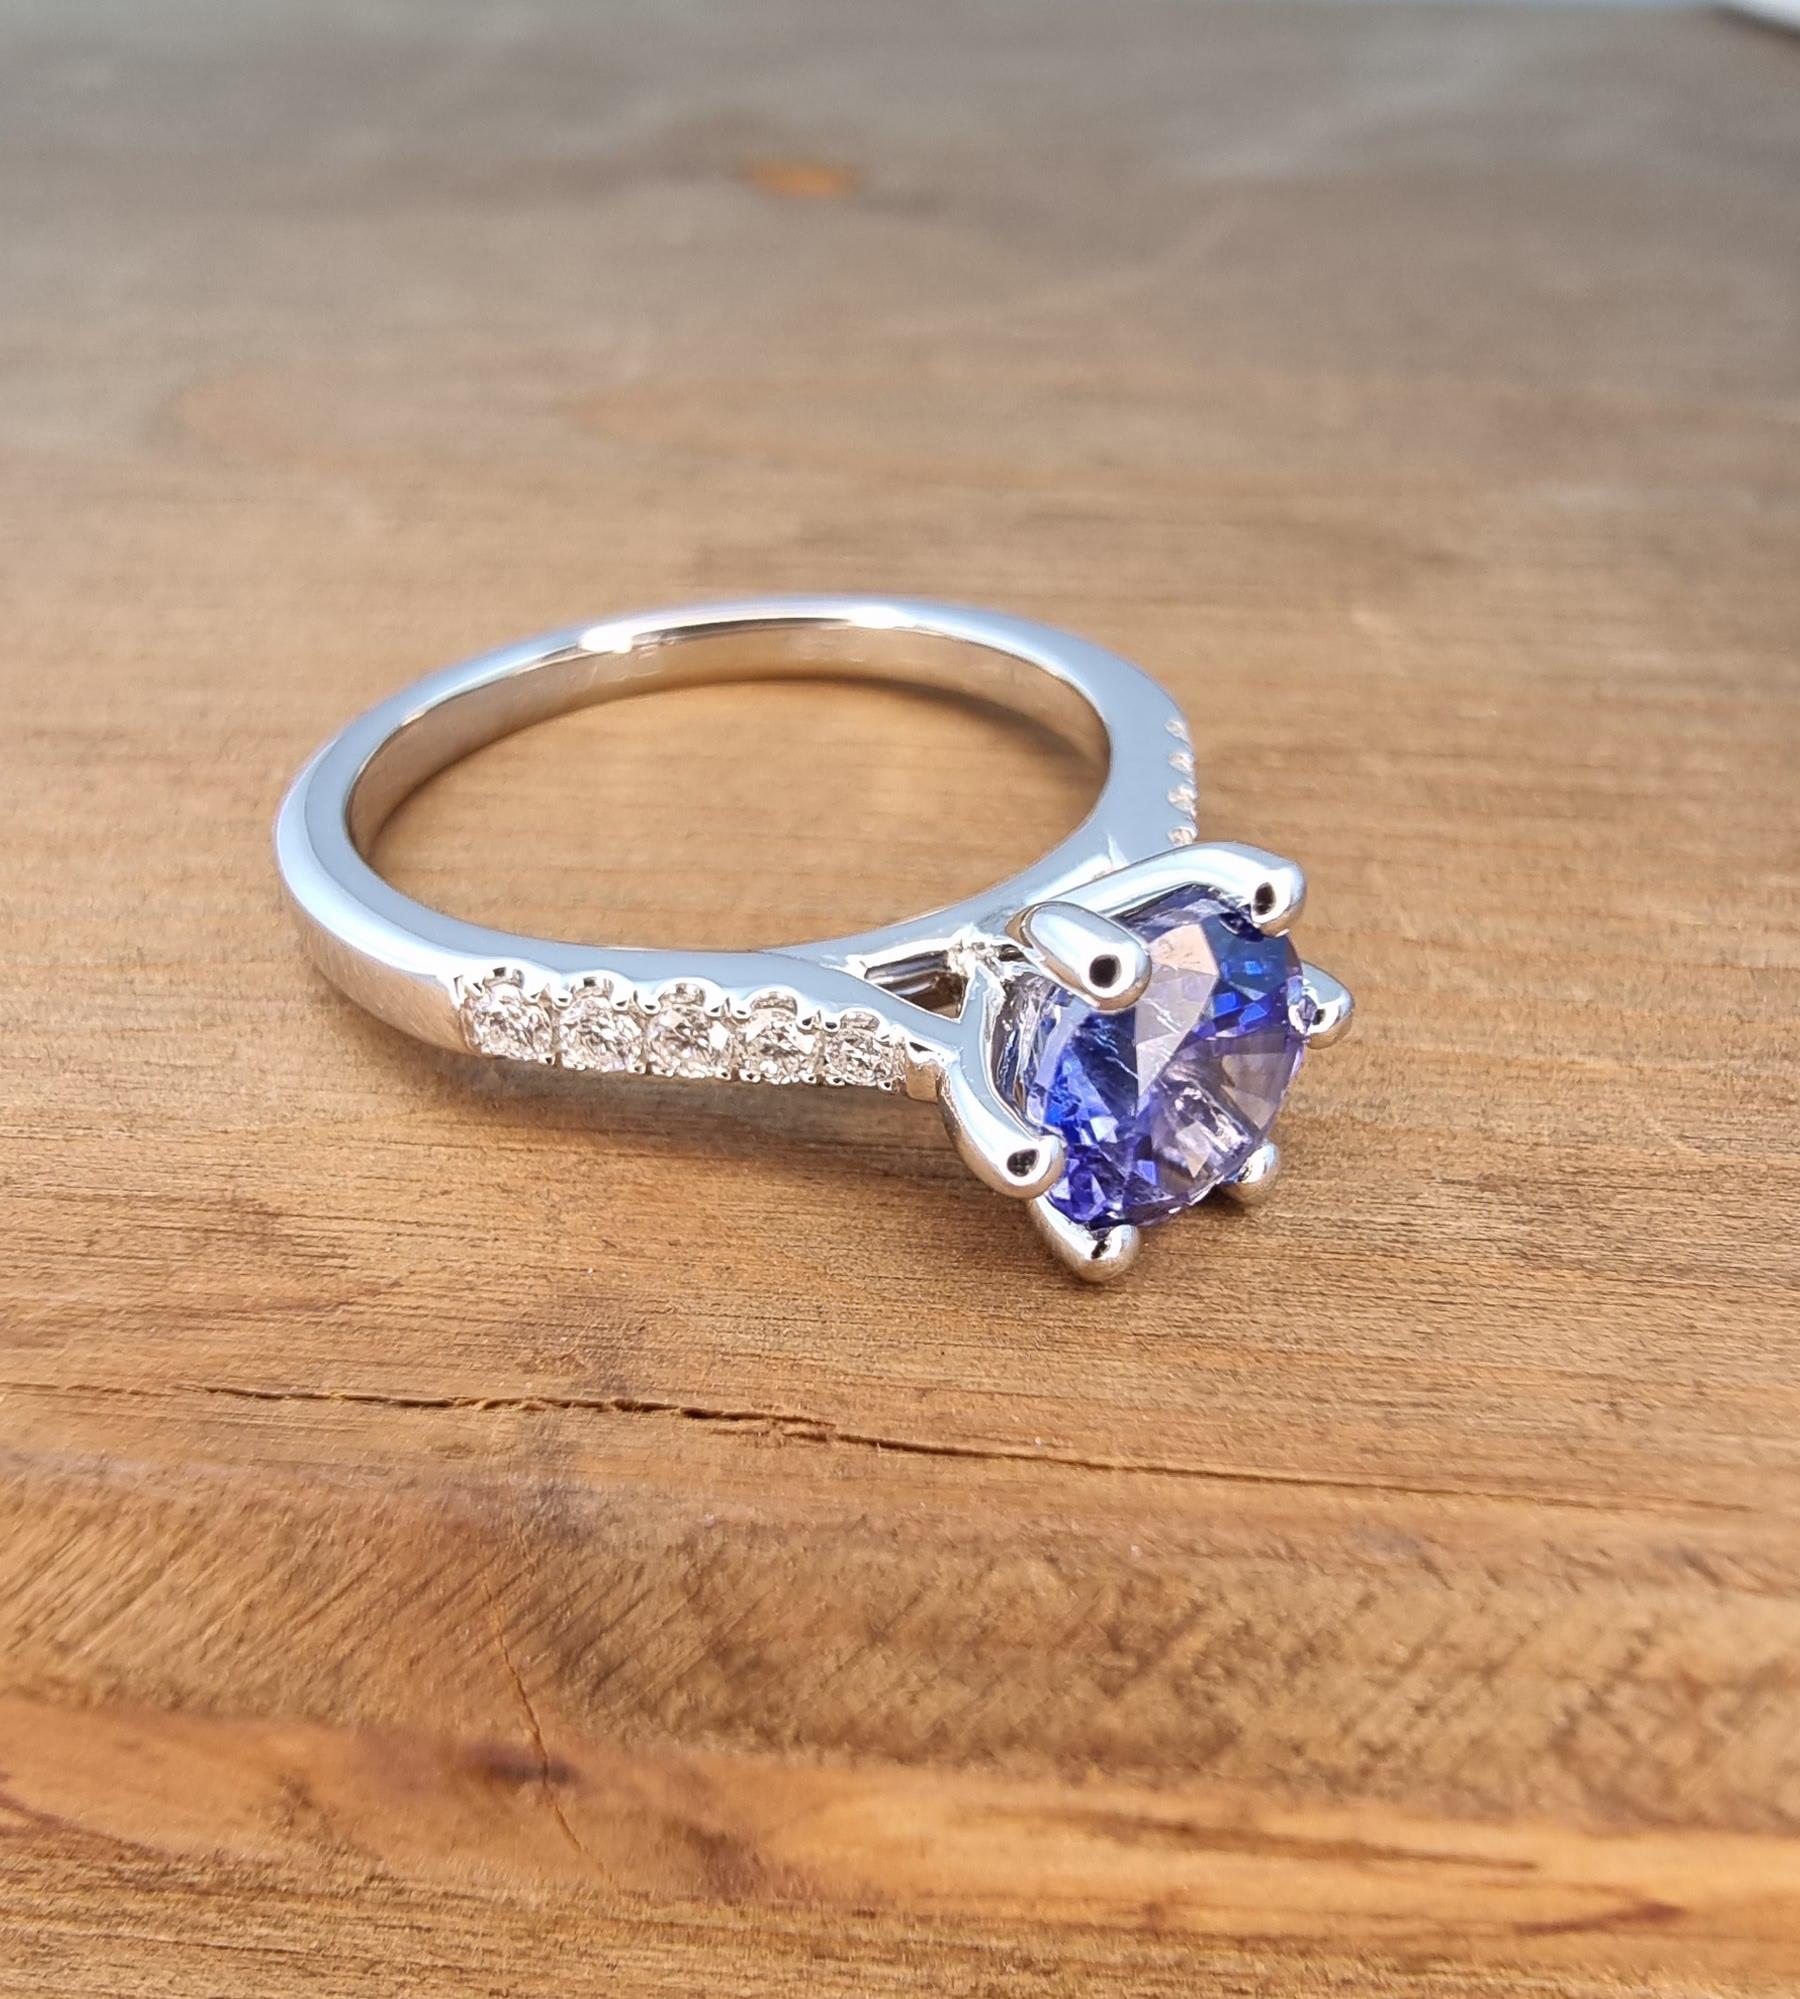 Stunning PT950 Ring with Ceylon Blue Sapphire and White Diamonds. Certified 2